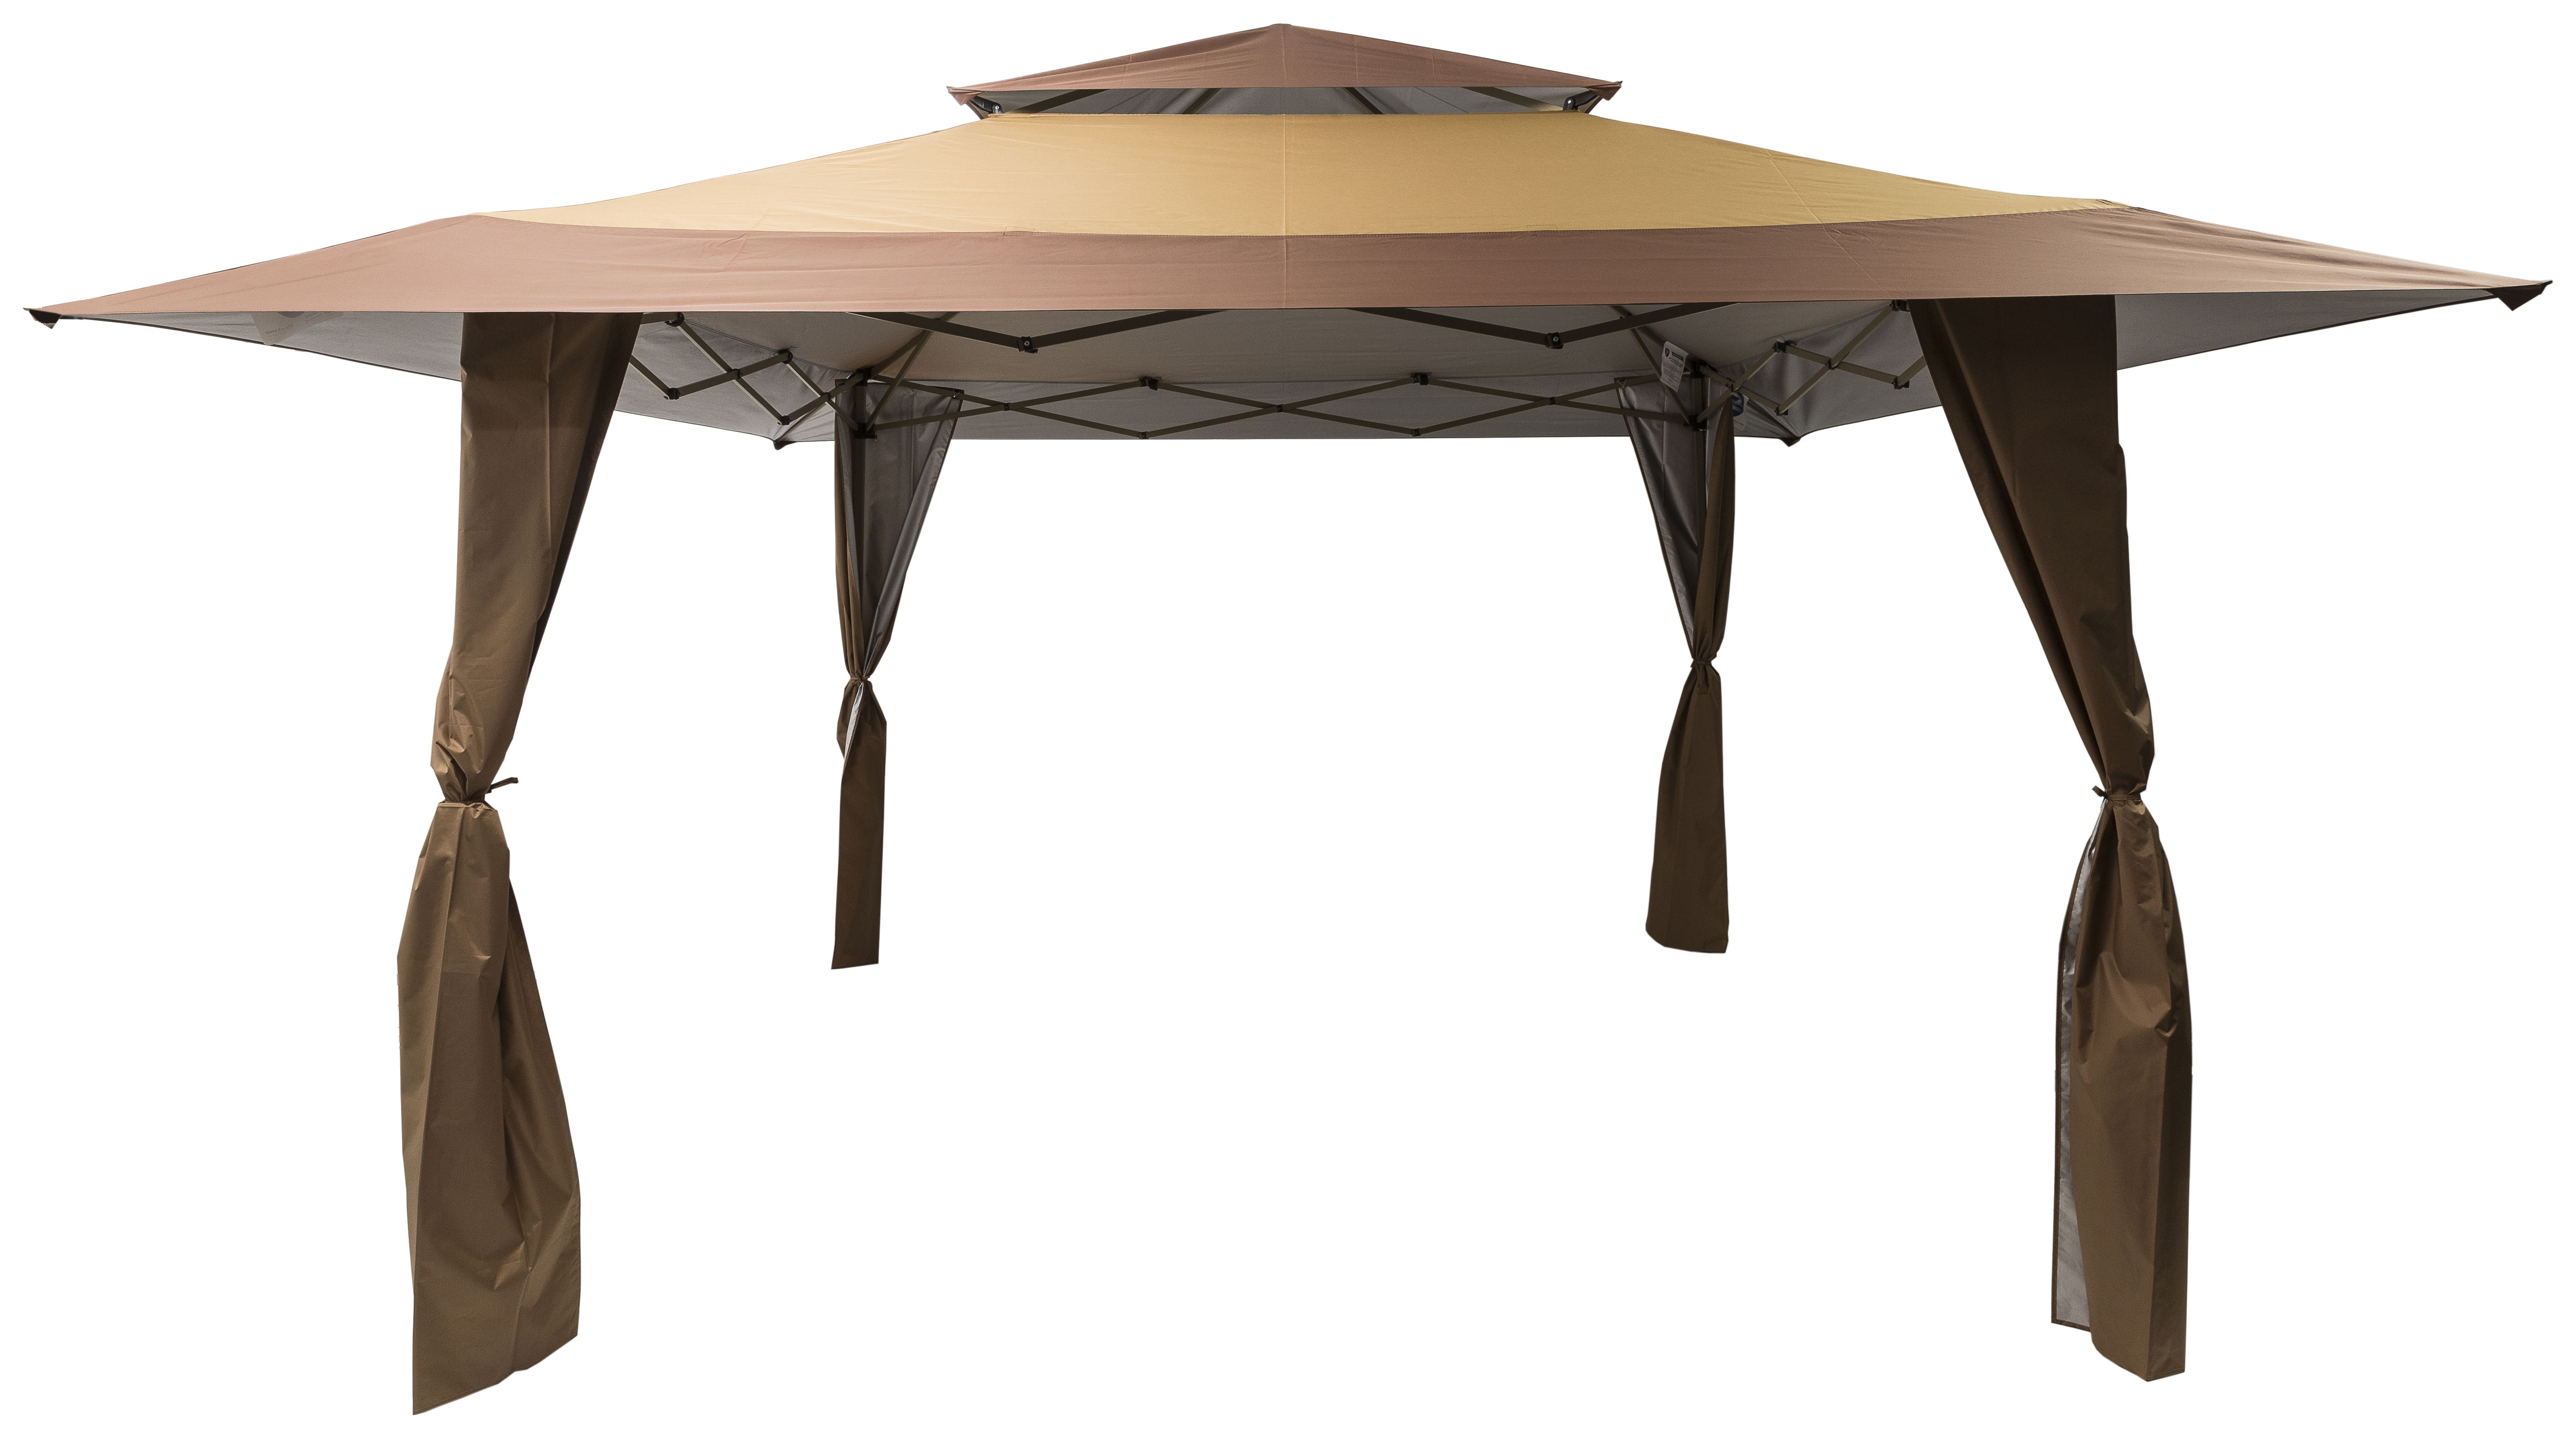 Image of Norfolk Leisure Got It Covered Pop Up Gazebo Taupe & Brown (4x4)